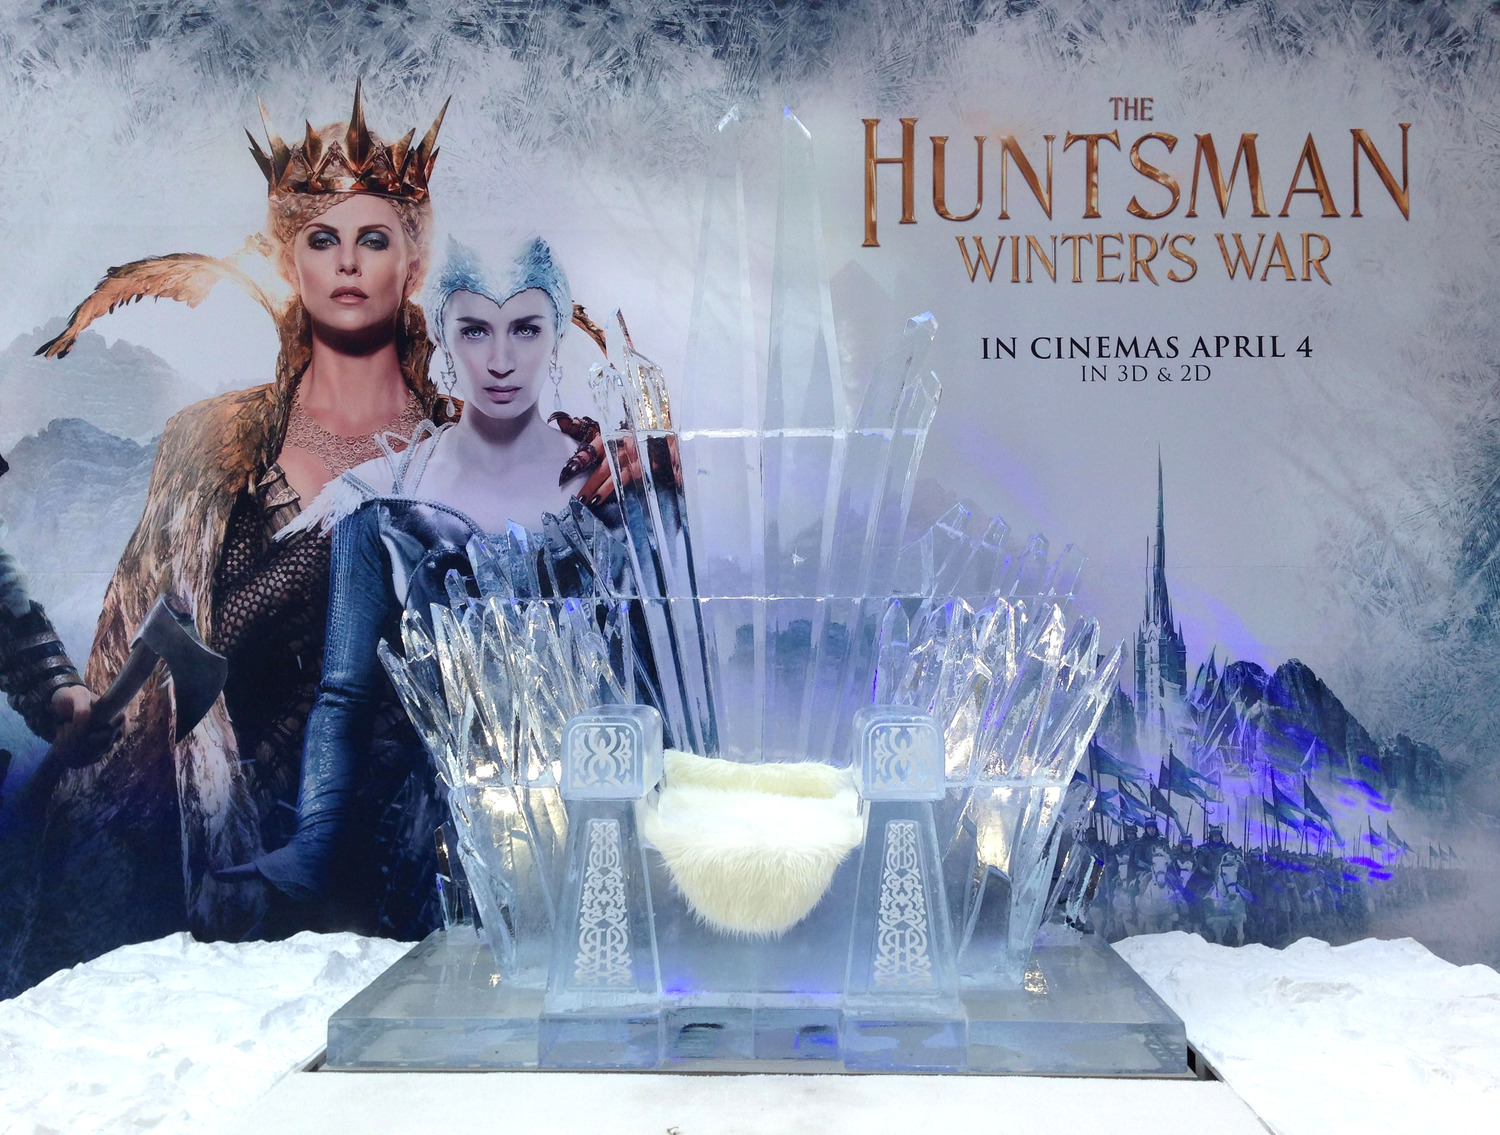 Extra Large Movie Poster Image for The Huntsman (#15 of 15)